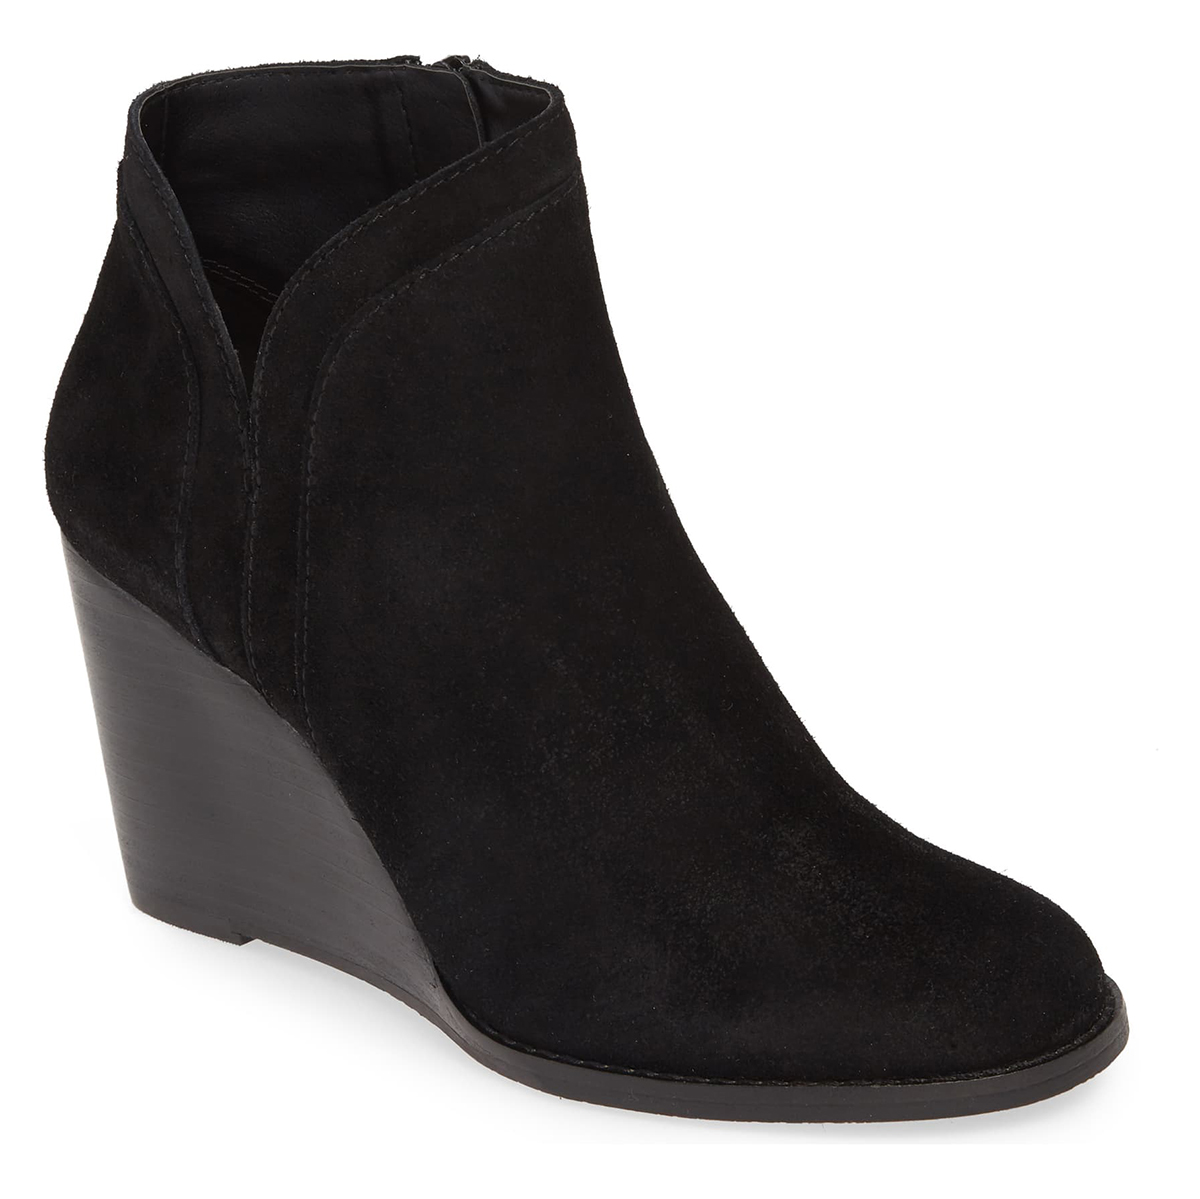 These Lucky Brand Wedge Booties Can Make Any Outfit Breathtaking